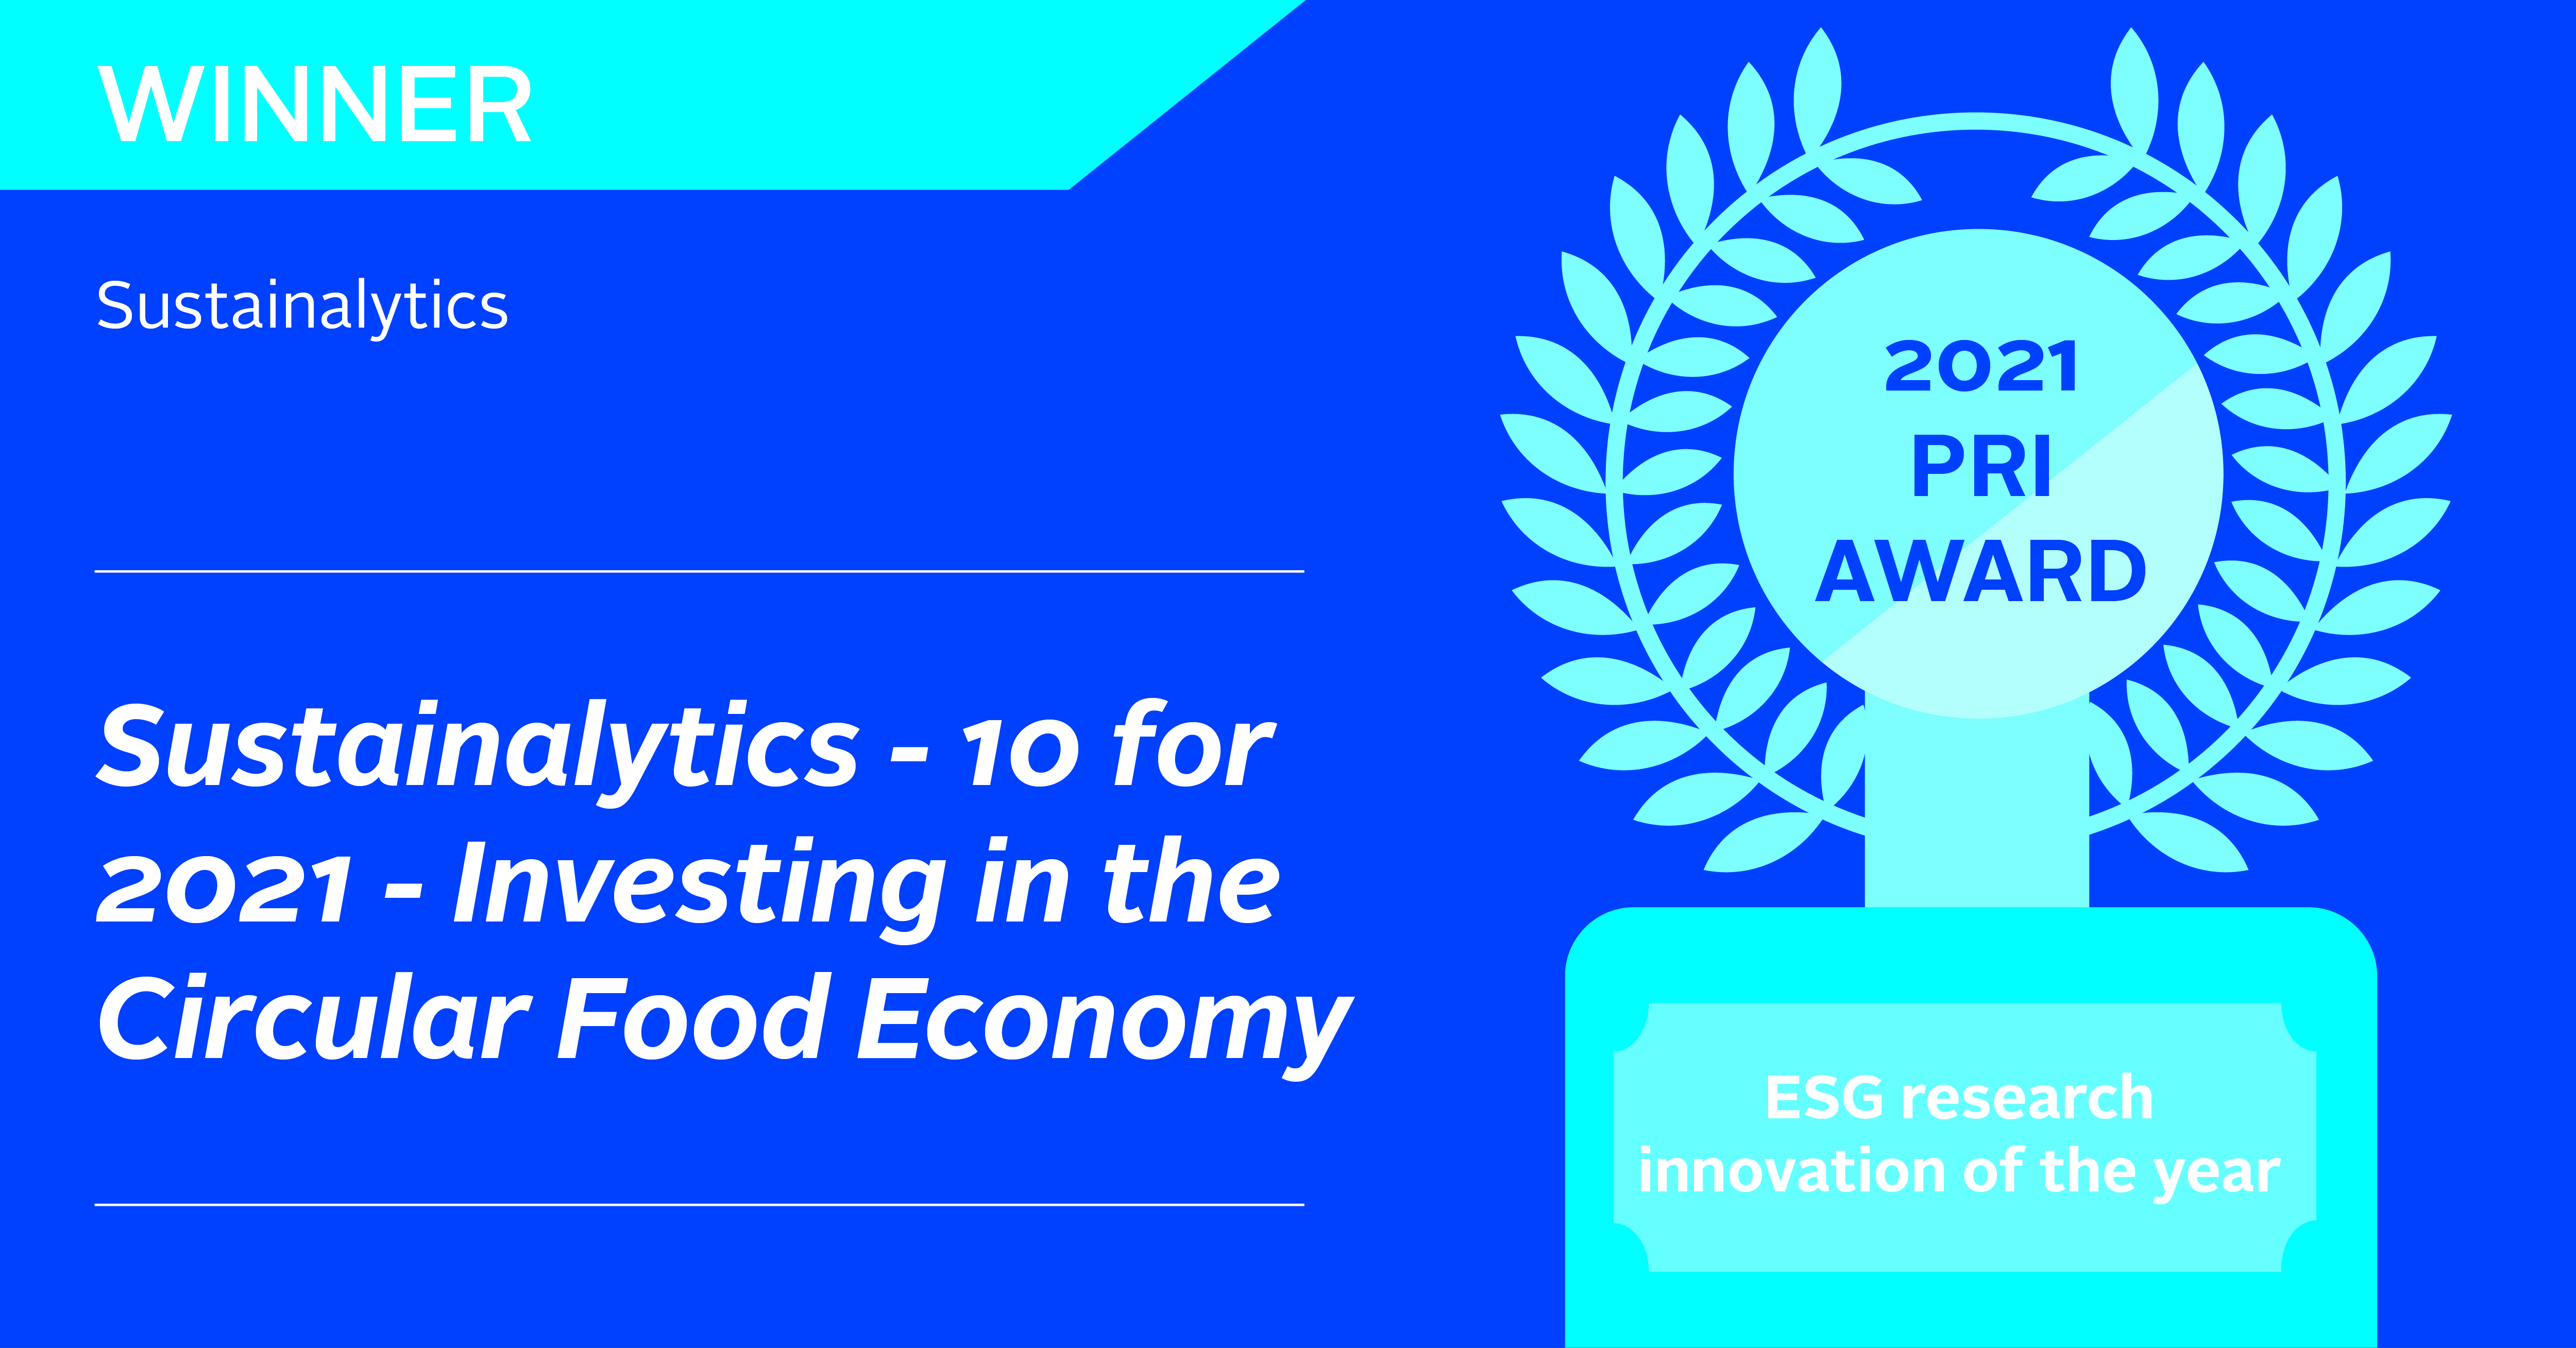 Sustainalytics - 10 for 2021 - Investing in the Circular Food Economy’ wins PRI Award for ESG research innovation